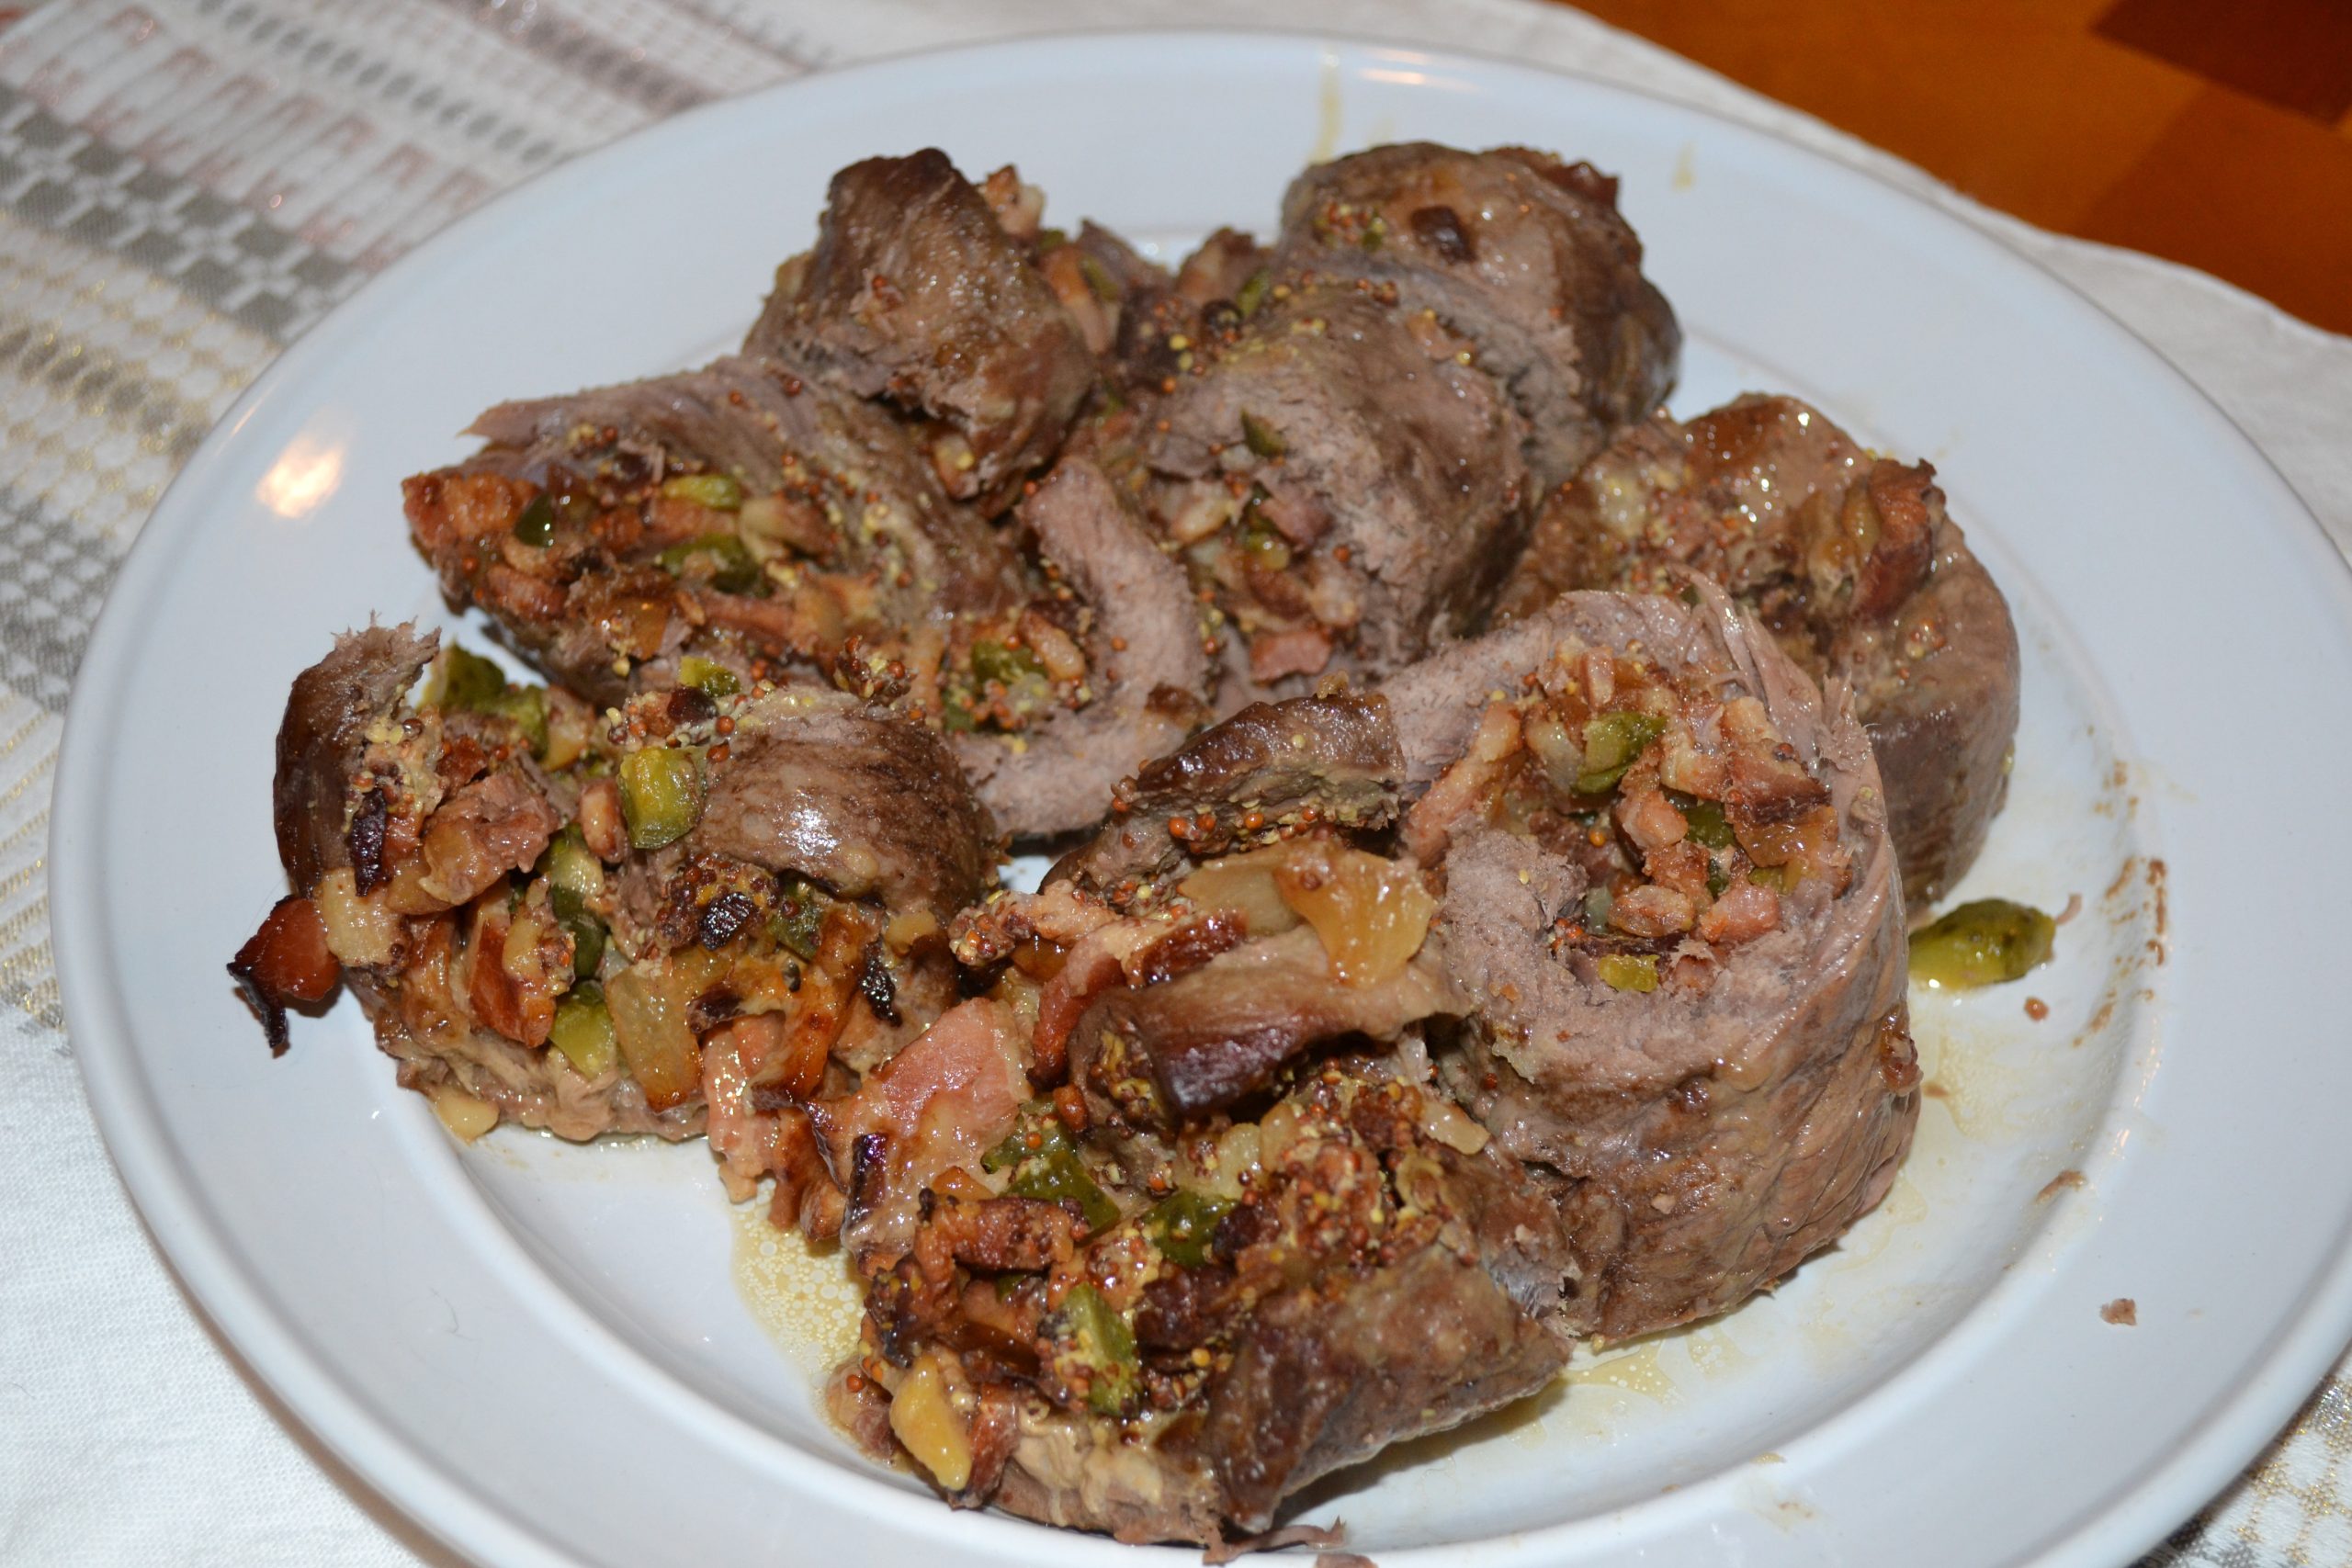 This recipe for German Beef Roulade is easy and taste amazing, no skill in the kitchen necessary.